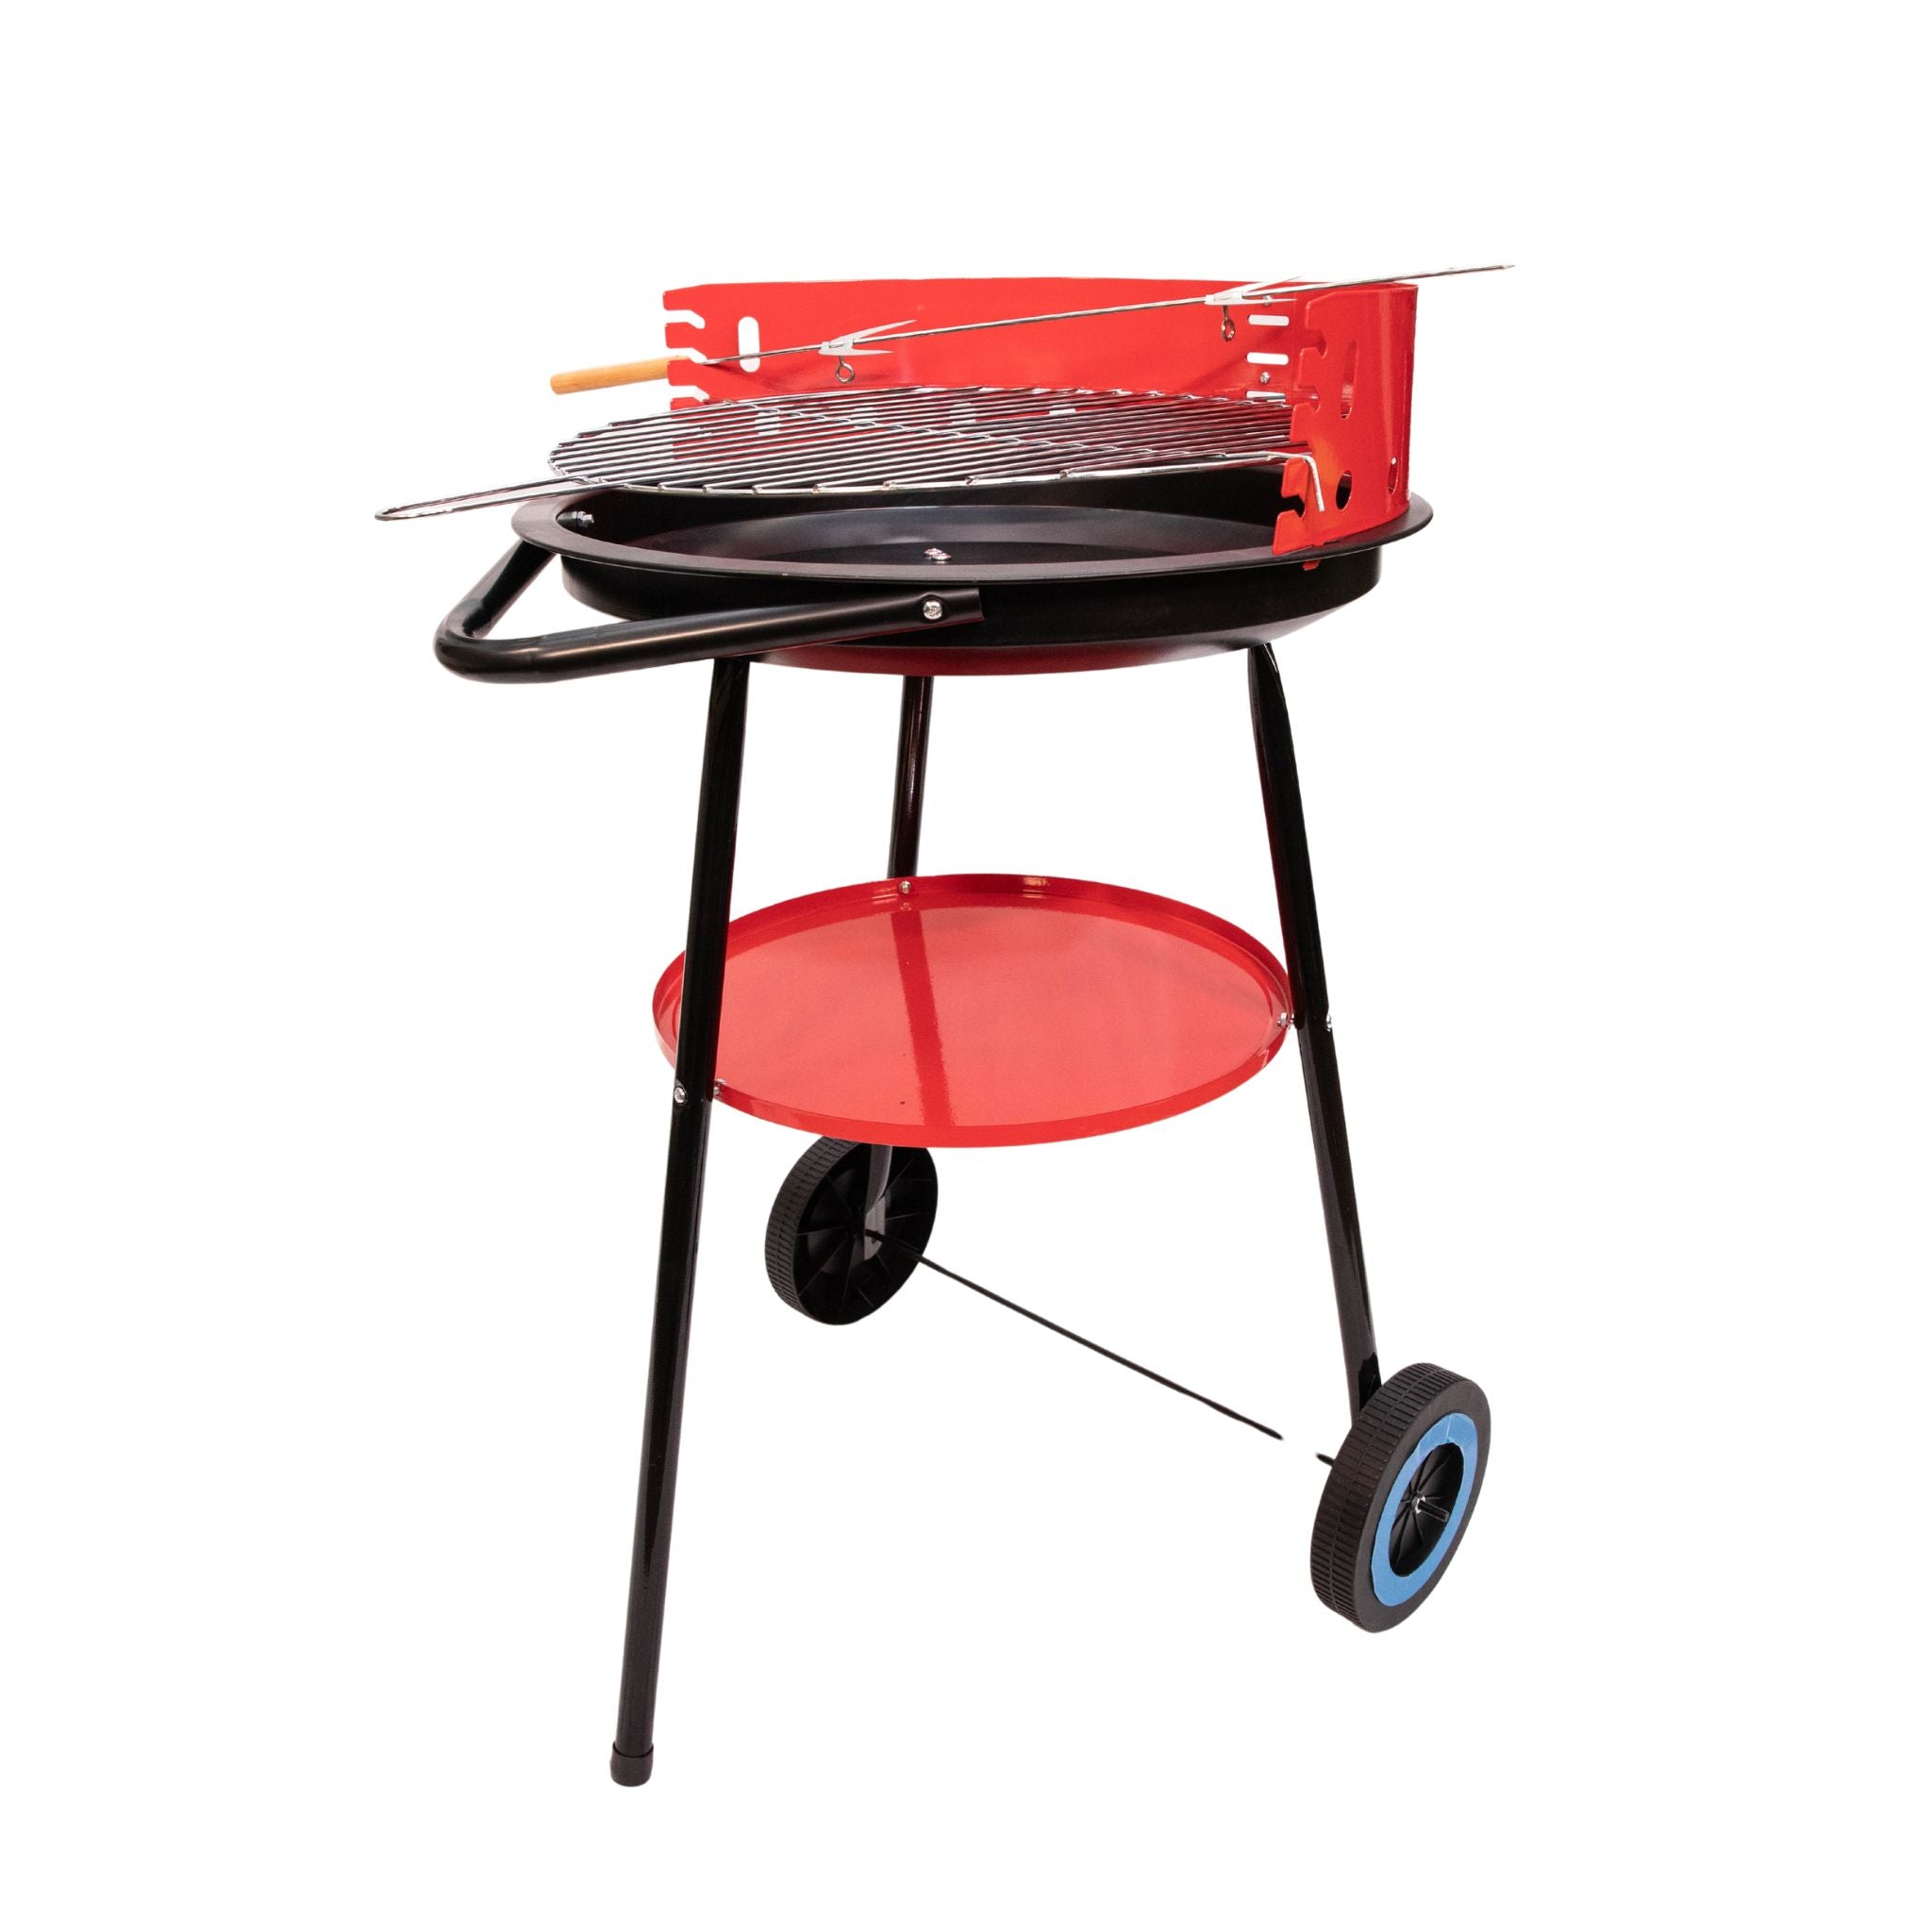 17" Outdoor Portable Garden Patio Round Charcoal Barbecue / BBQ with Wheels